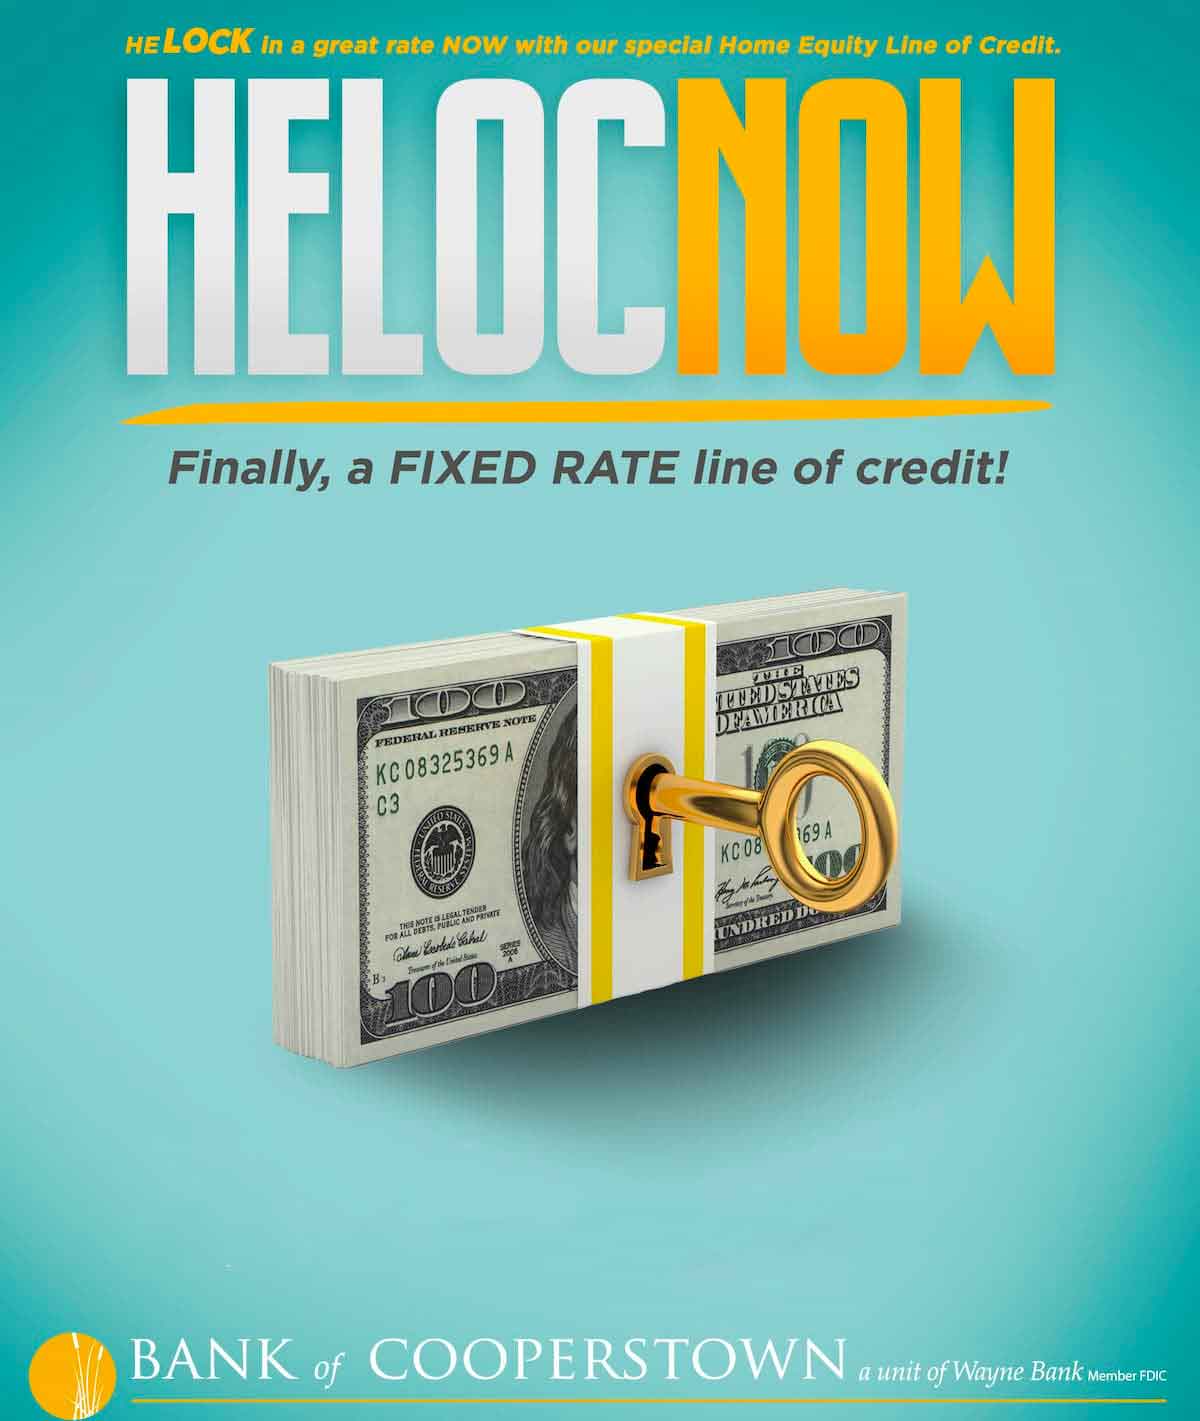 Finally, a Fixed Rate of credit